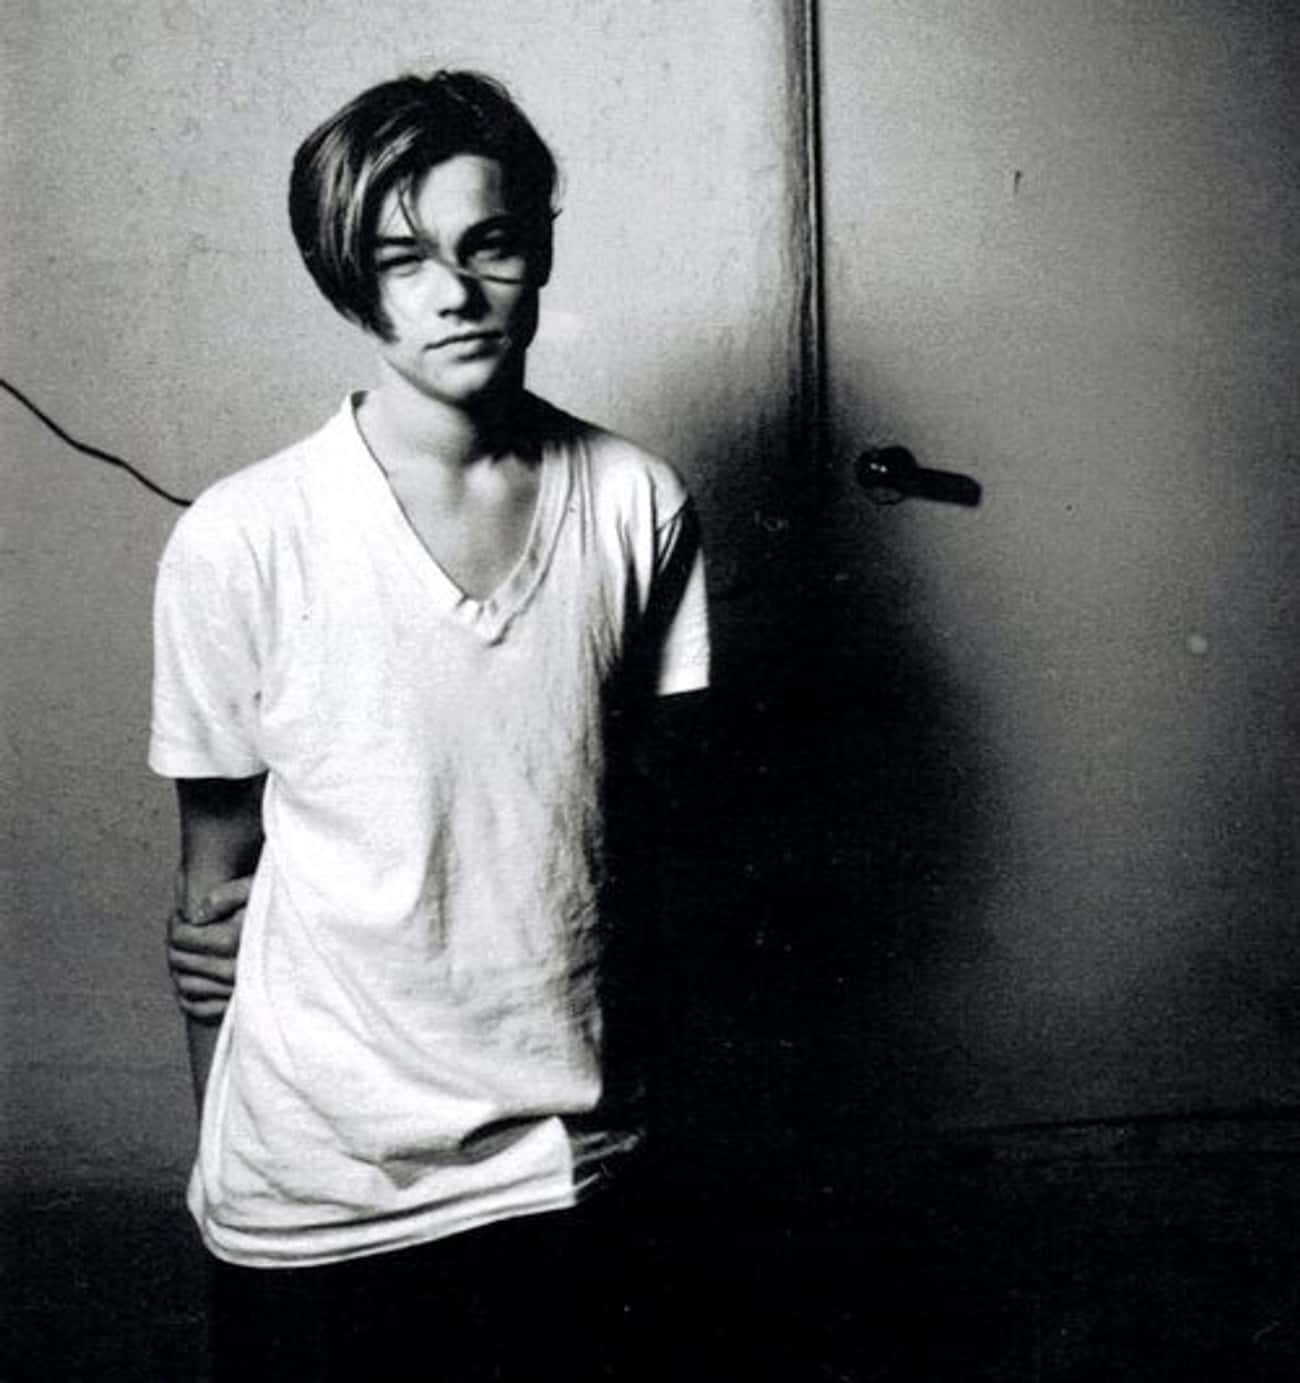 Young Leonardo DiCaprio In That White T